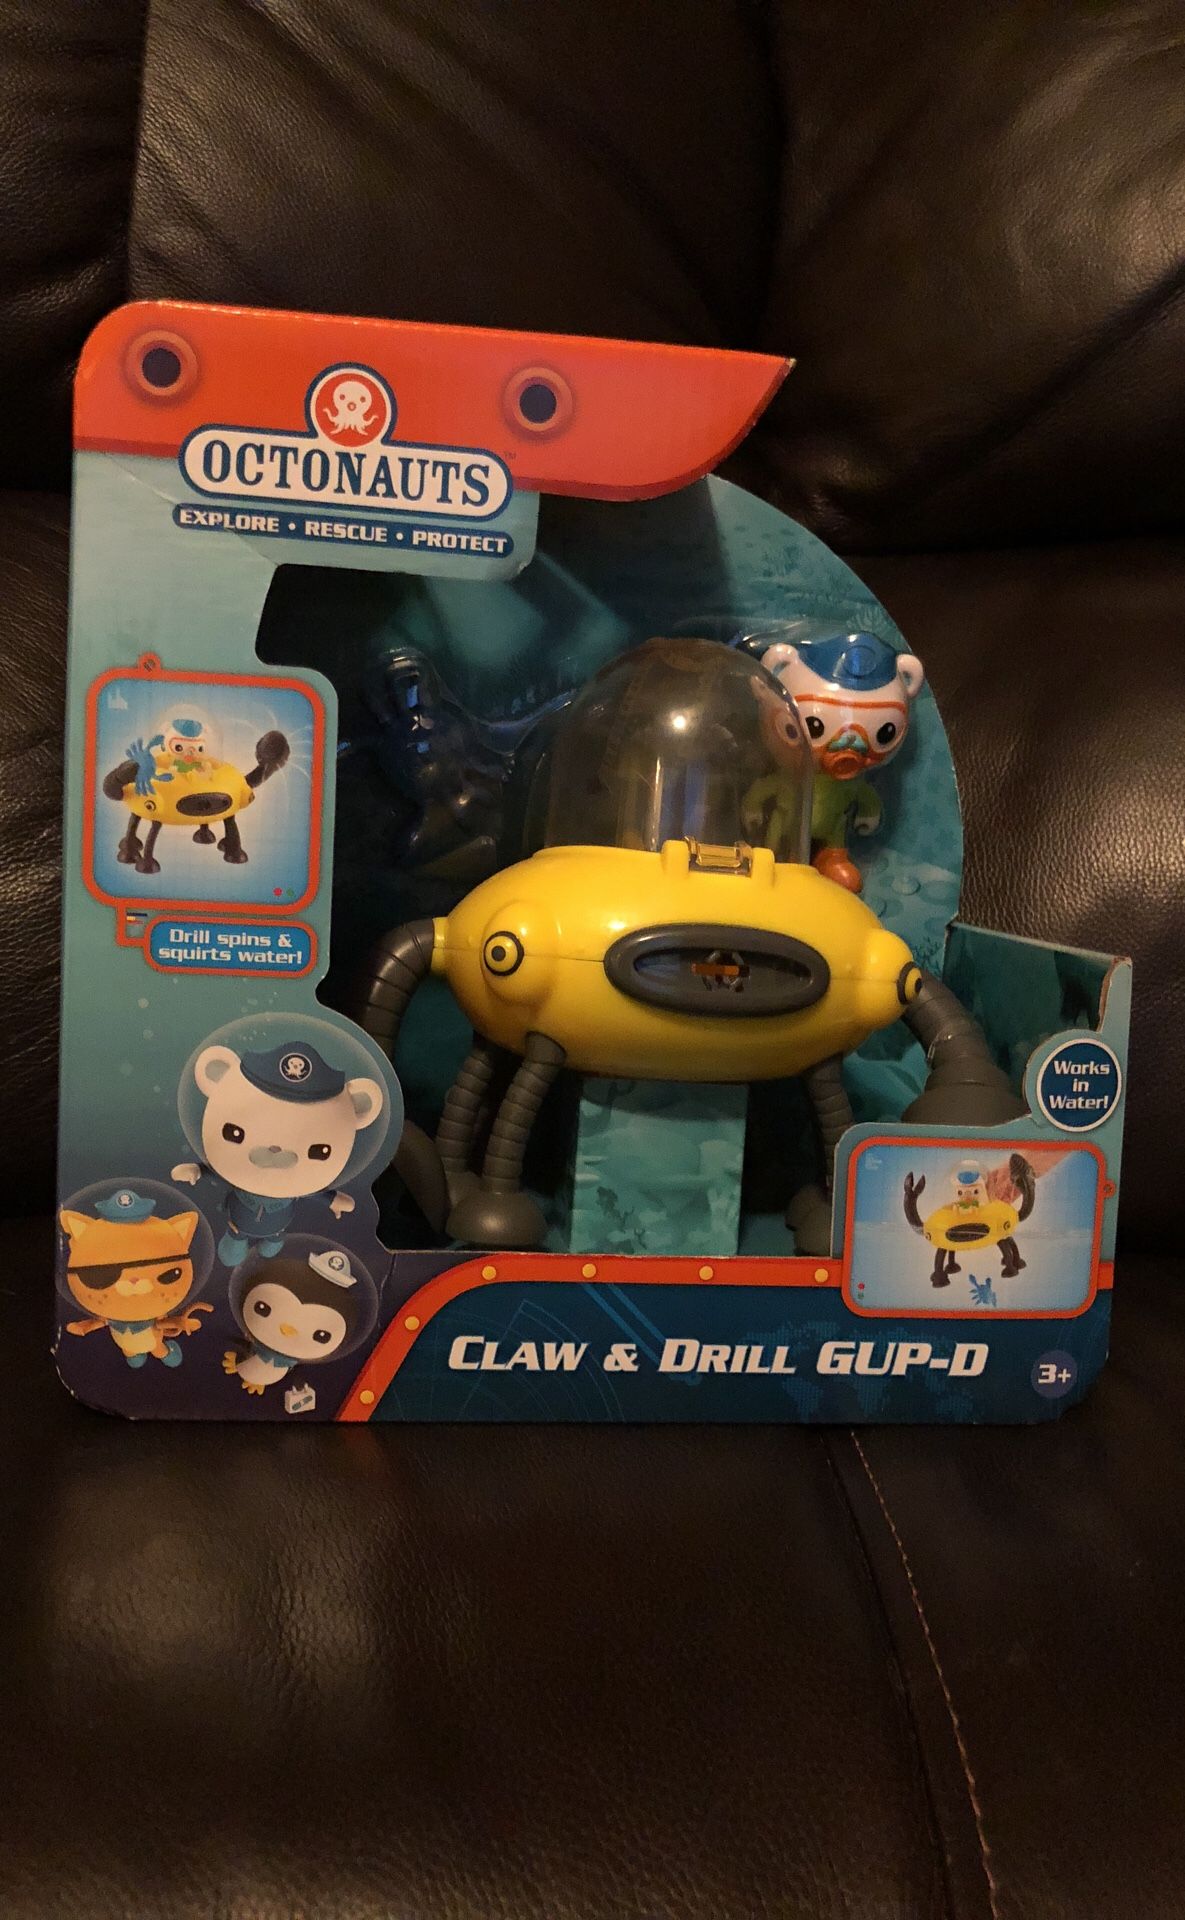 Octonauts Claw and Drill GUP-D